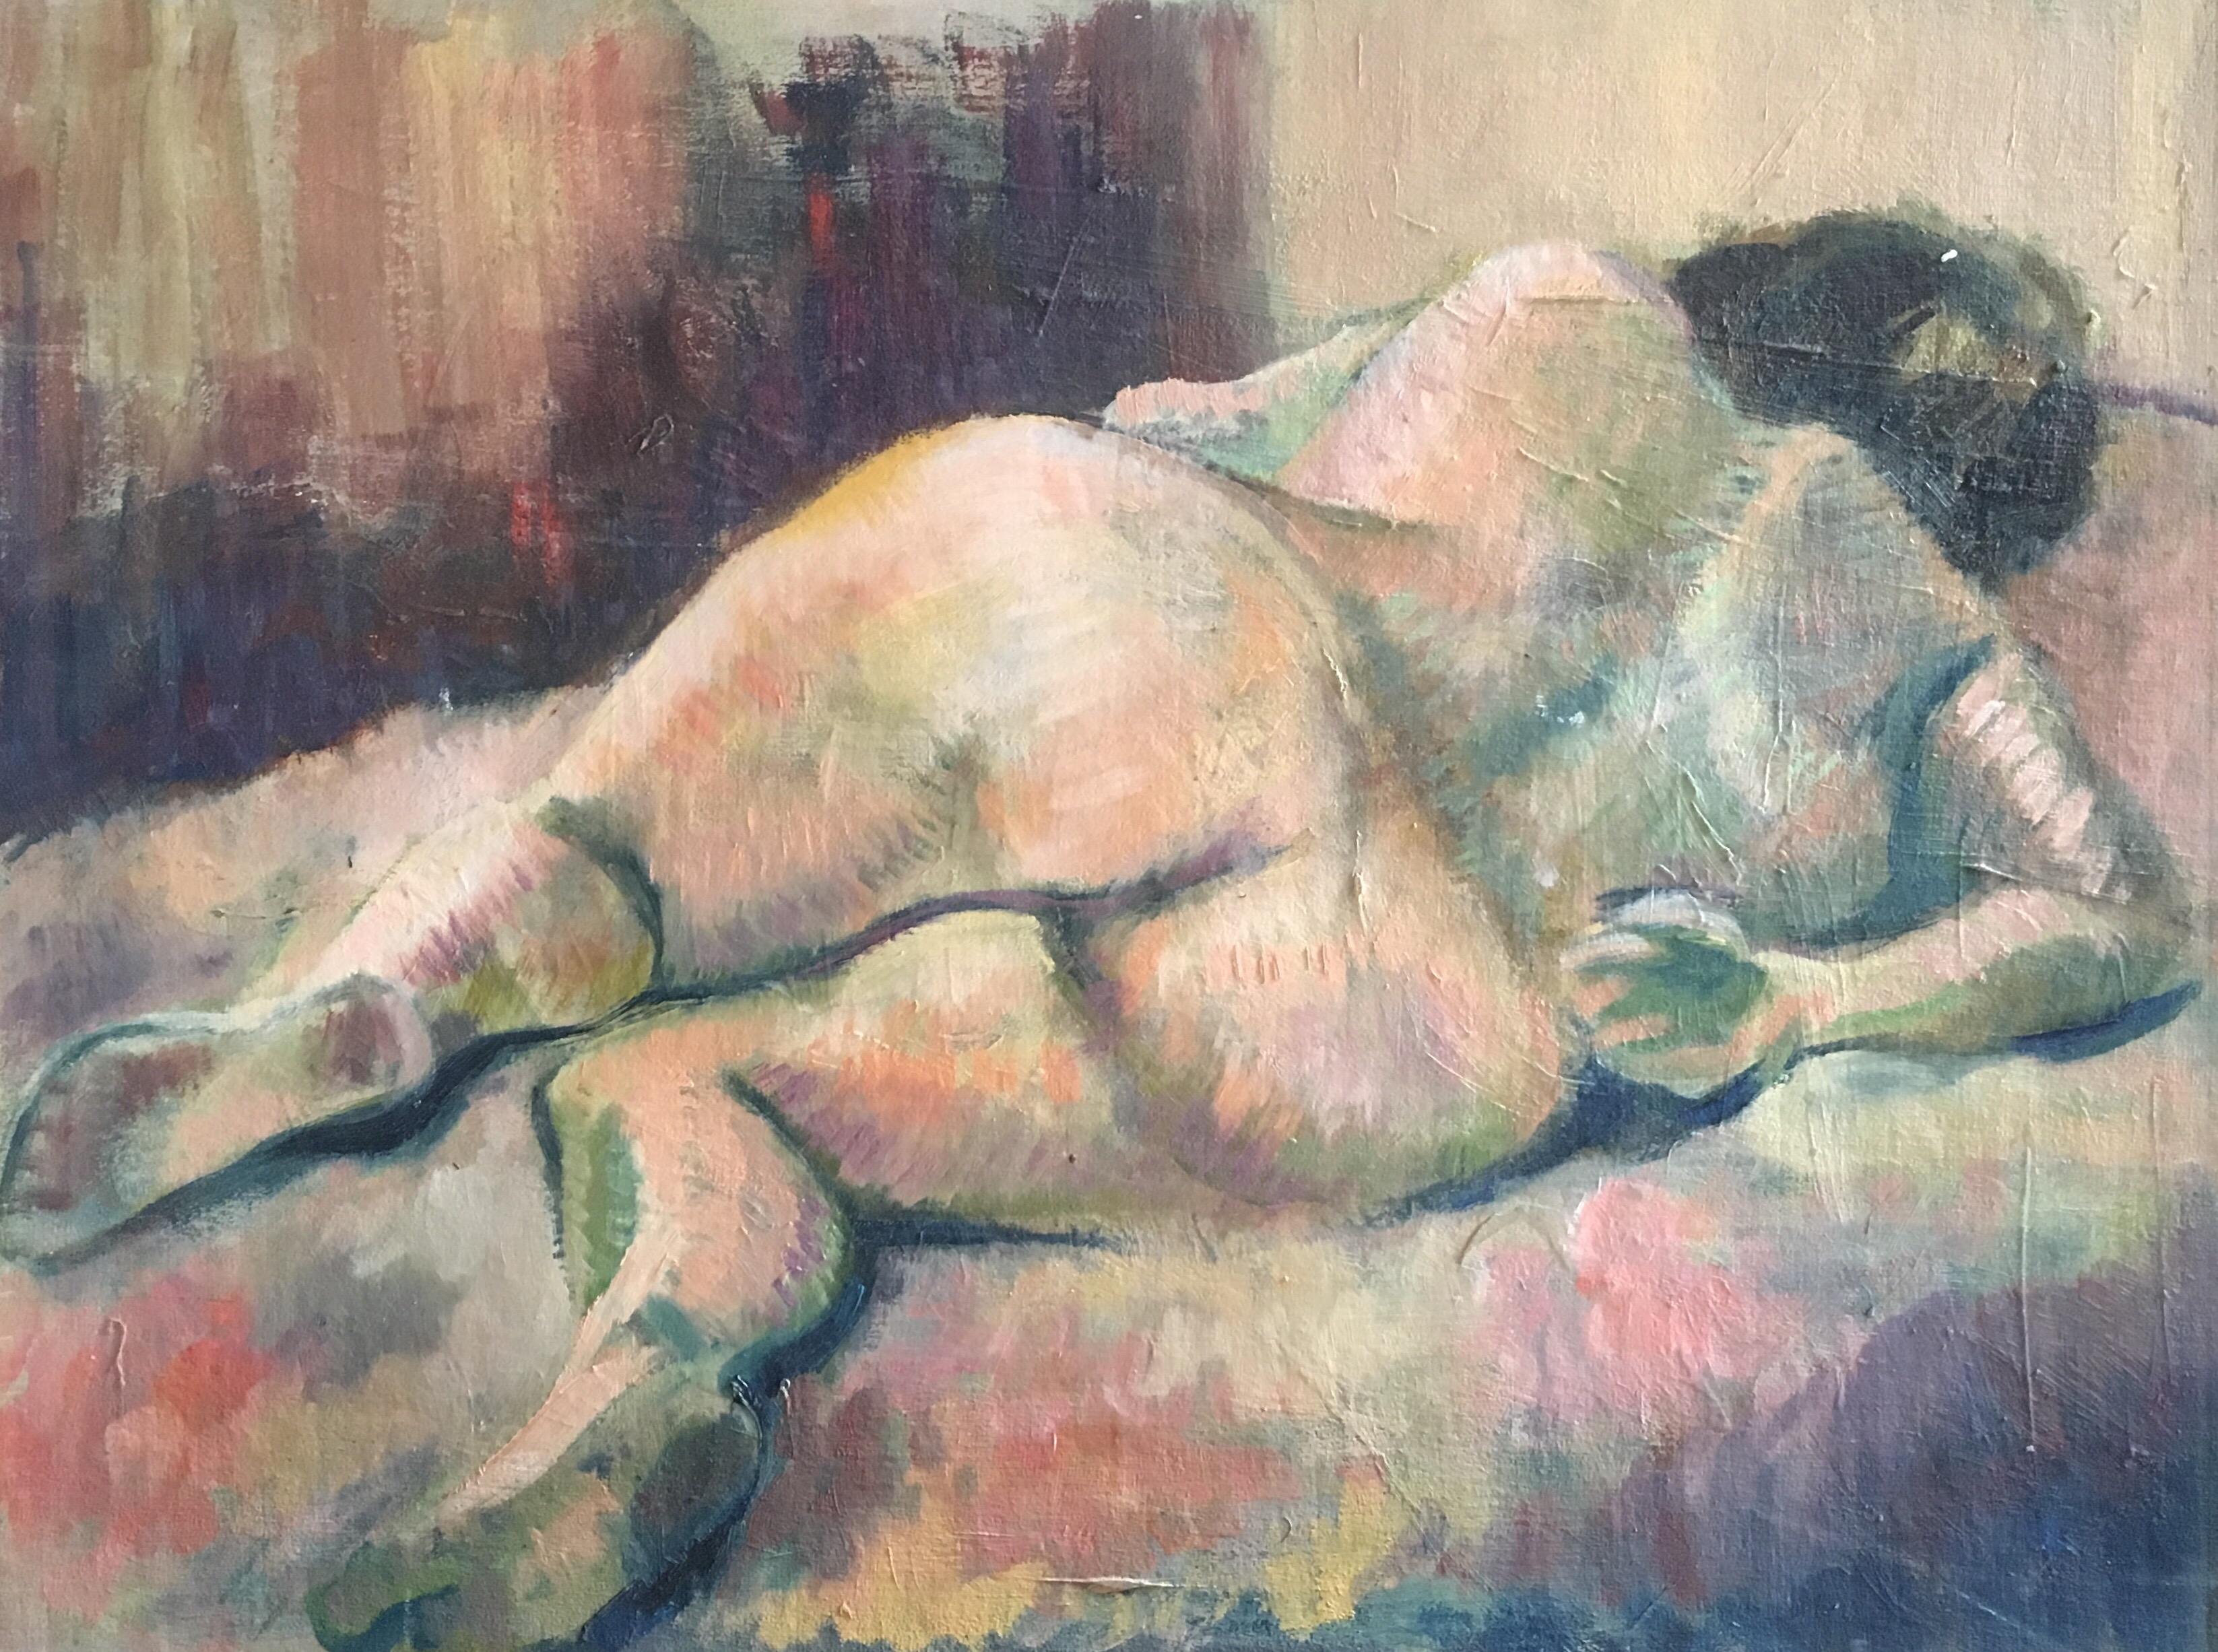 Nude Woman, Abstract Oil Painting, Mid 20th Century, British Artist